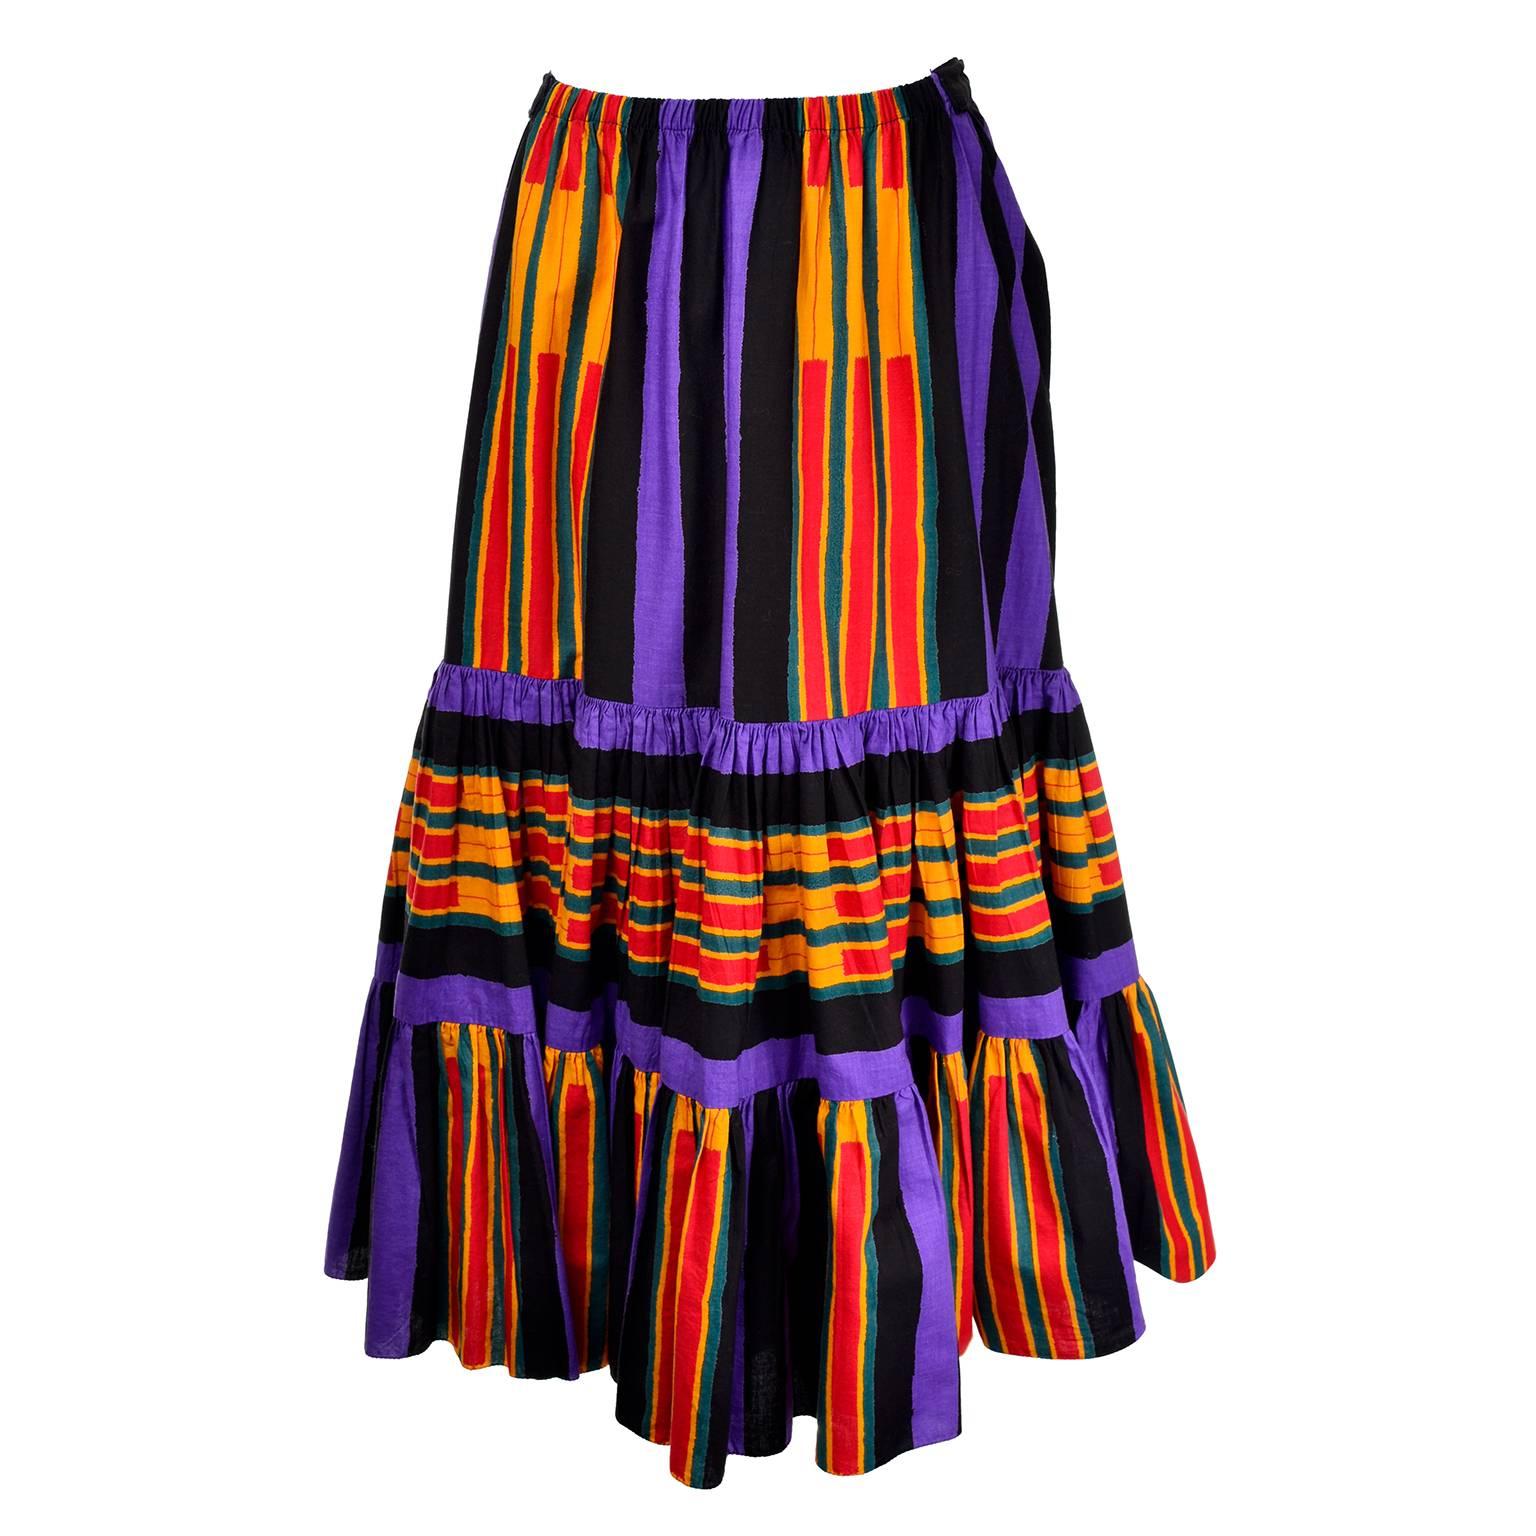 This is one our my favorite vintage skirts! This late 1970's vintage striped cotton peasant style ruffled skirt was designed by Emanuel Ungaro and was sold at the upscale boutique Nan Duskin in Philadelphia. Every high society woman in the area